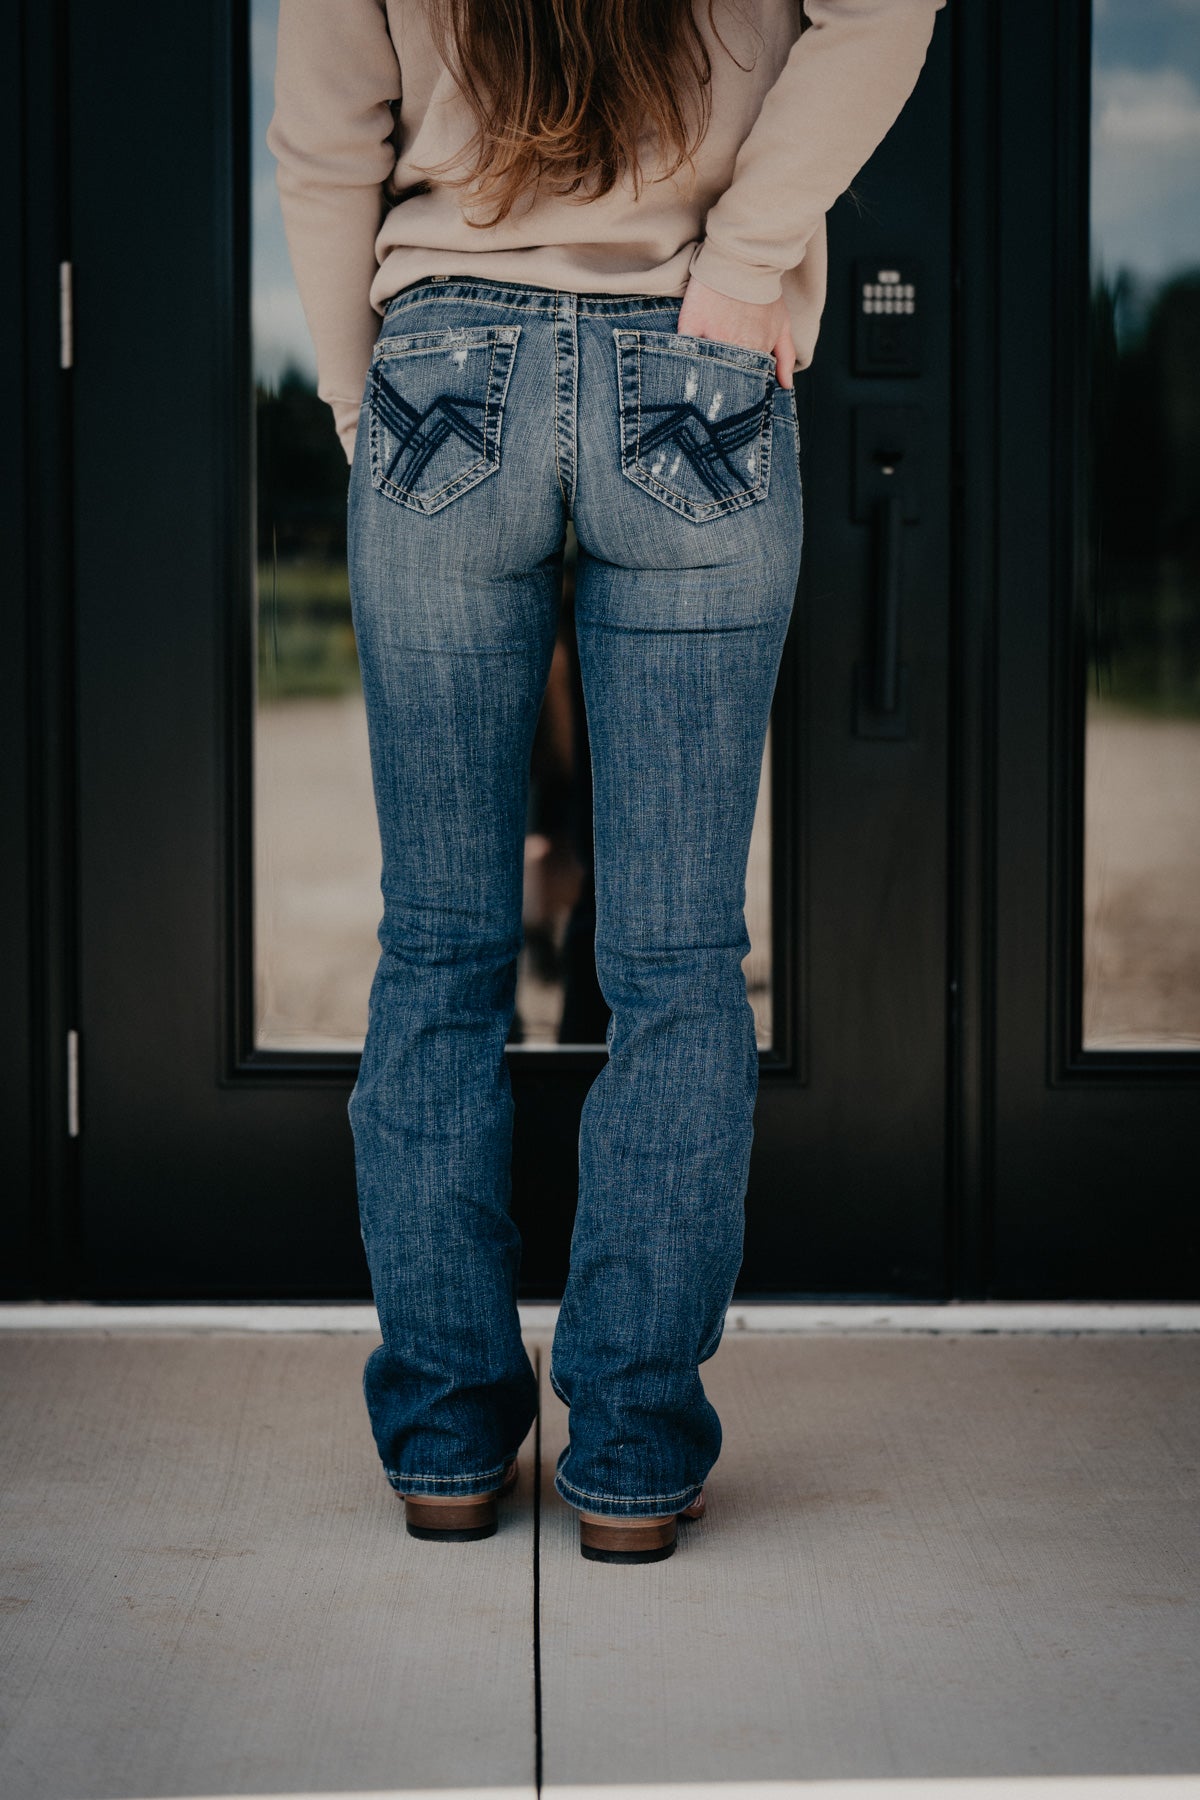 Phoebe' Perfect Rise Bootcut Jean by Ariat